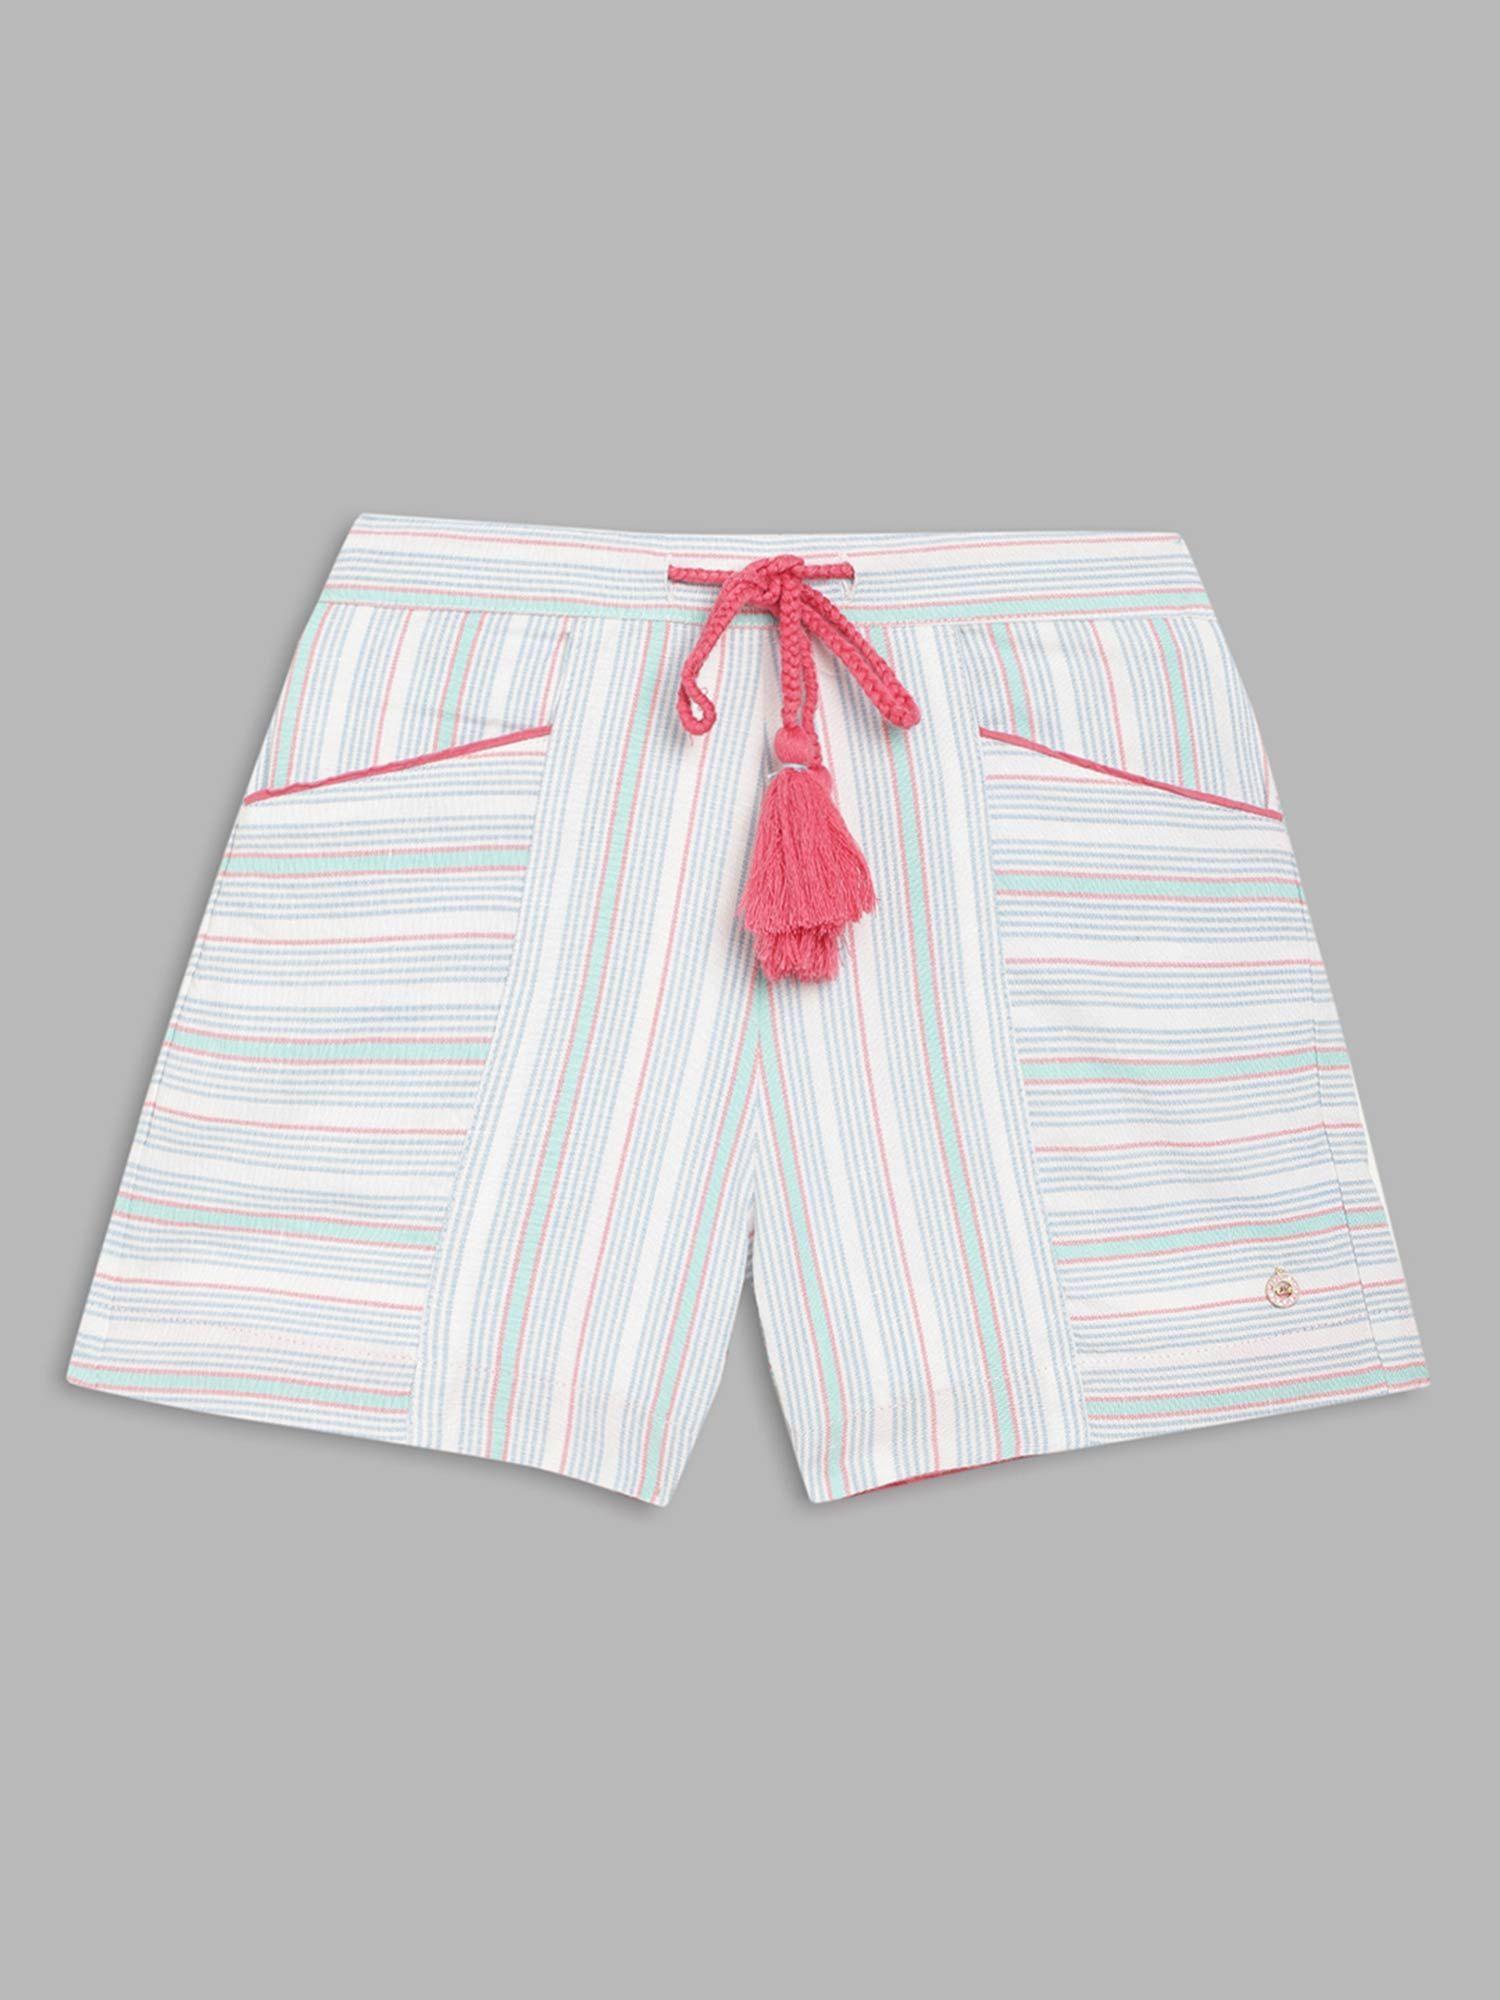 girls multi-color striped shorts